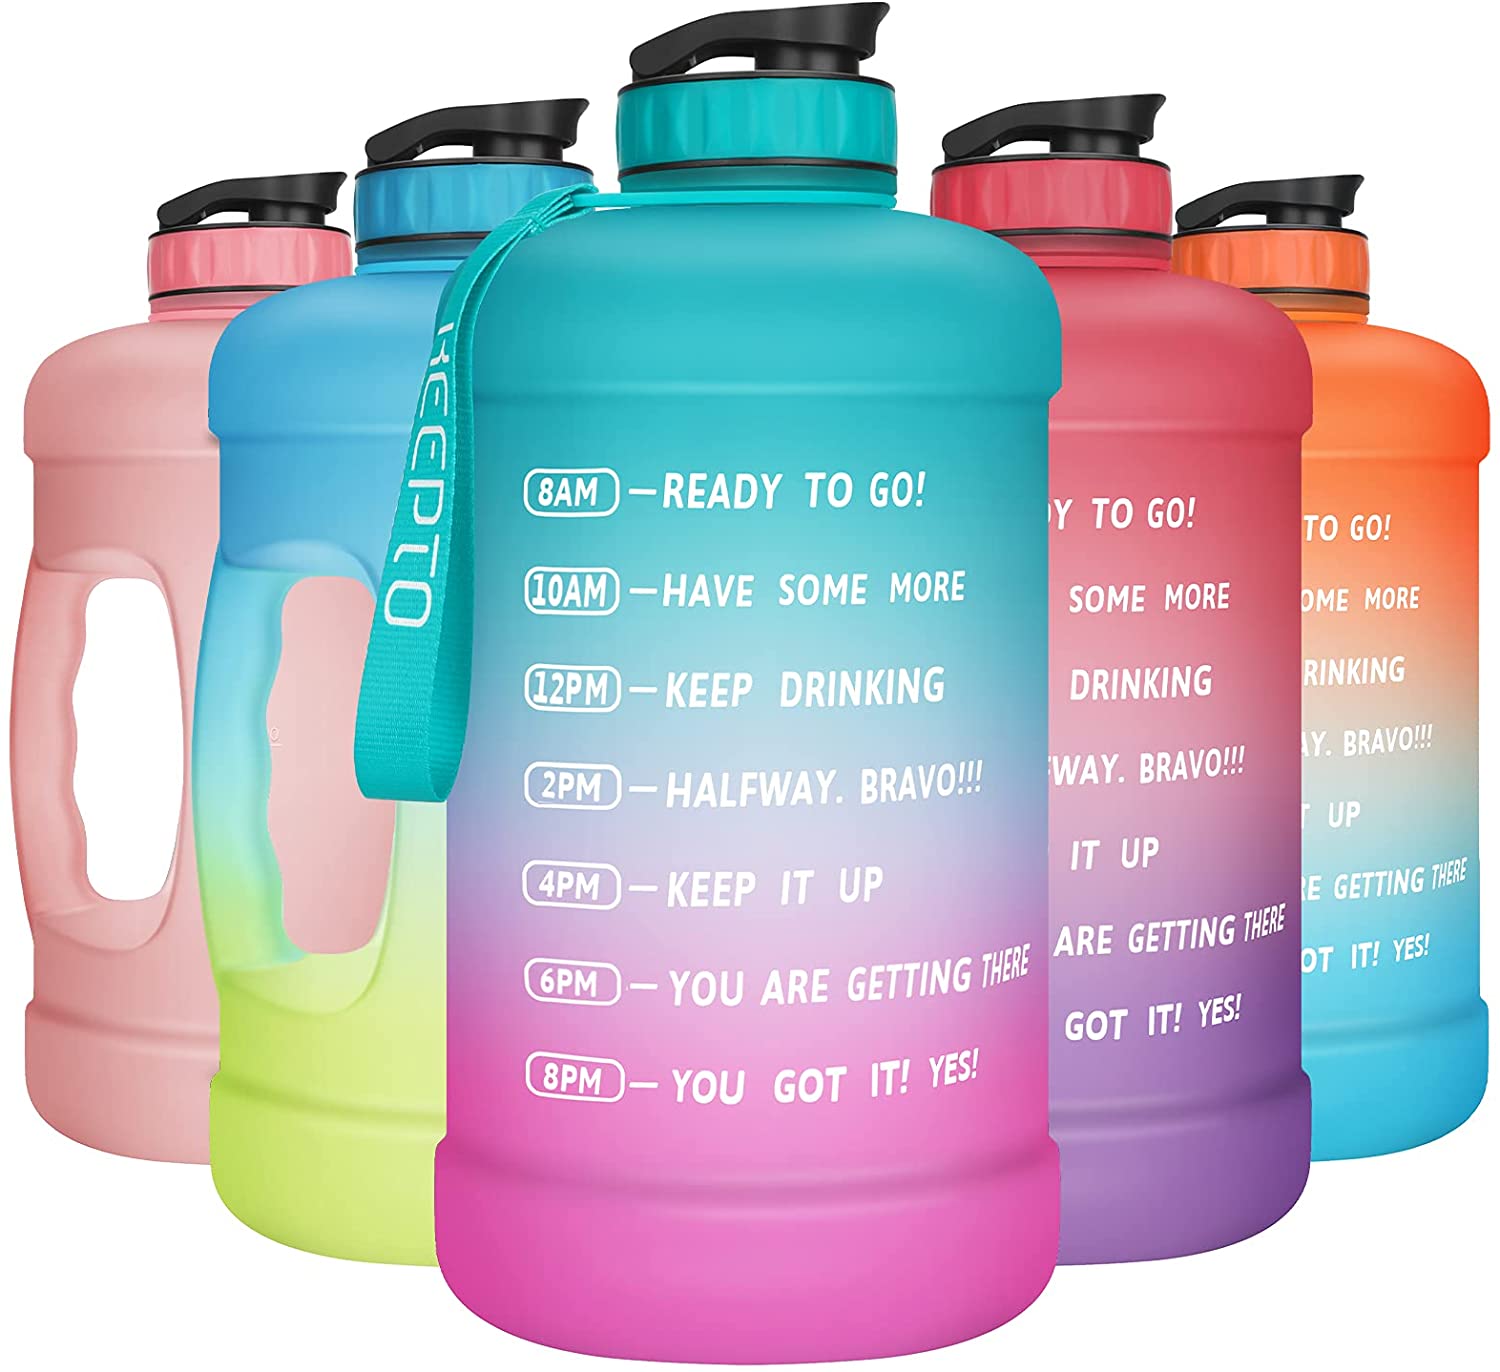 Cille Sports Water Bottle Straw Motivational 64oz-half gallon BPA Free Leak-Proof With Handle and Straw Throughout The Whole Day for Camping Hiking Water Jug Sports Outdoor Exercise Enthusiasts 